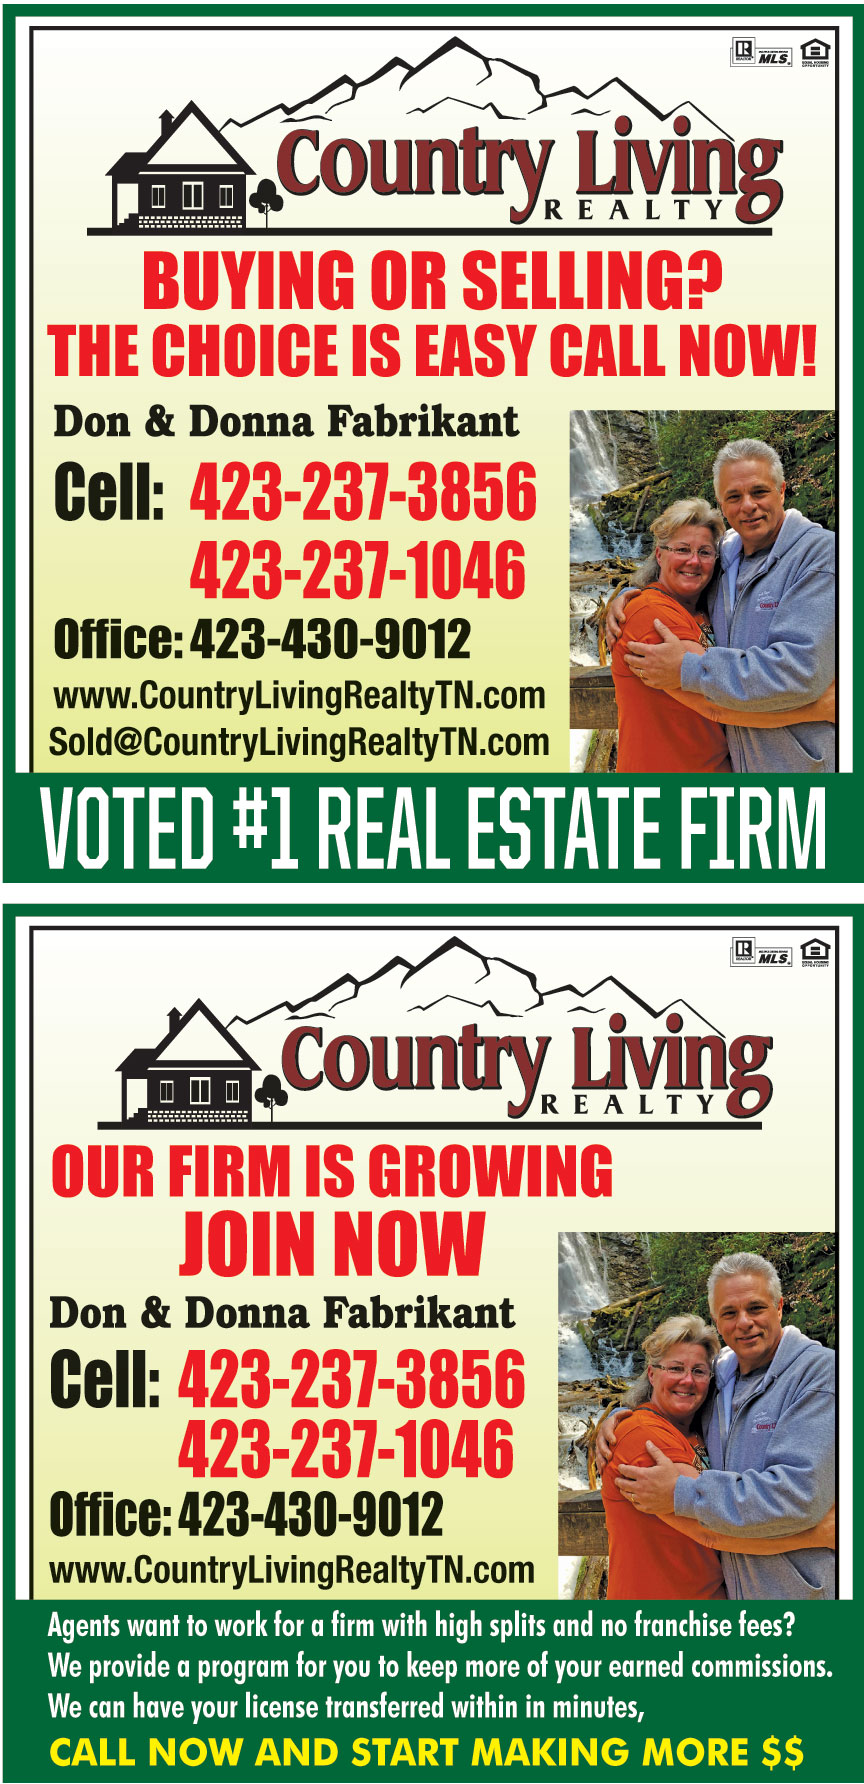 COUNTRY LIVING REALTY